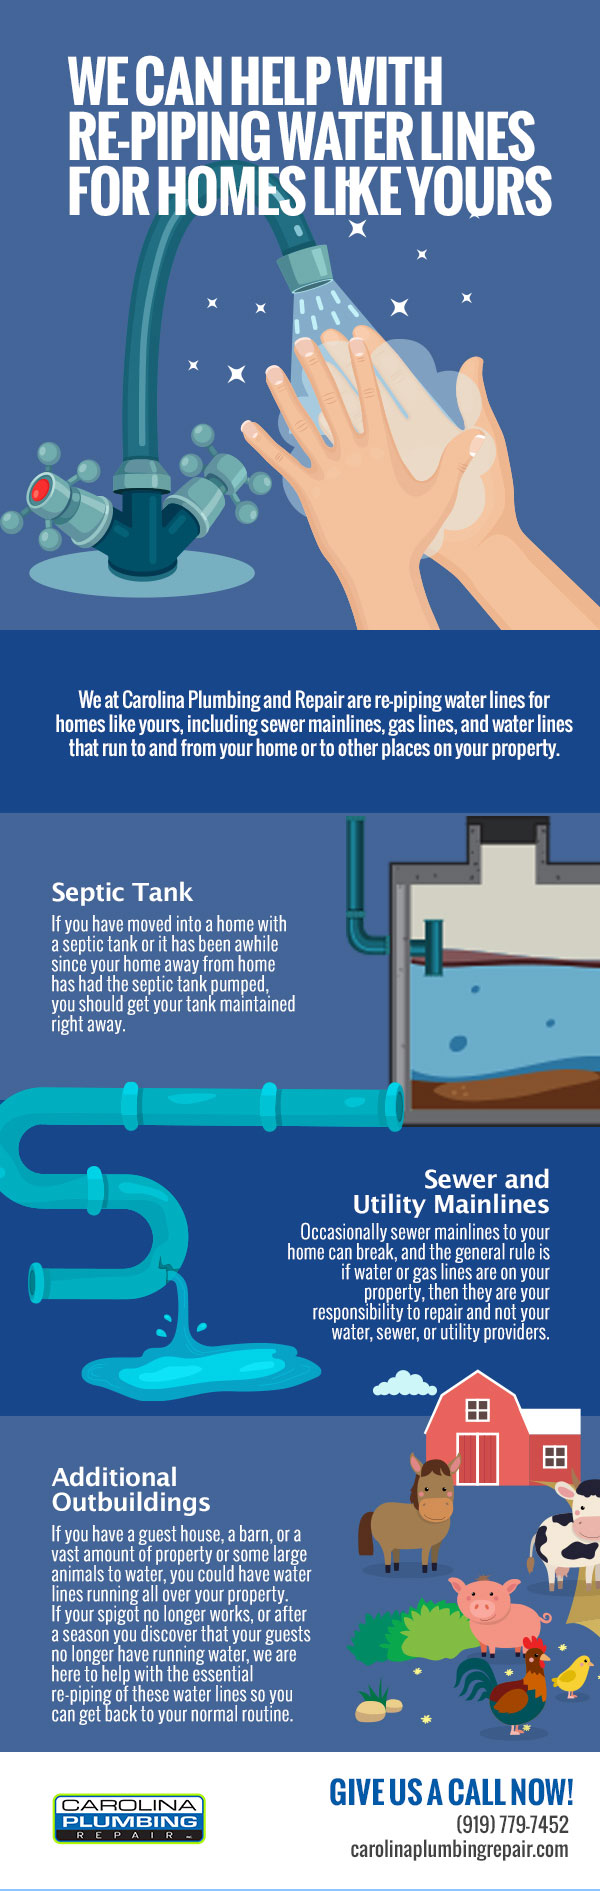 We Can Help with Re-Piping Water Lines for Homes Like Yours